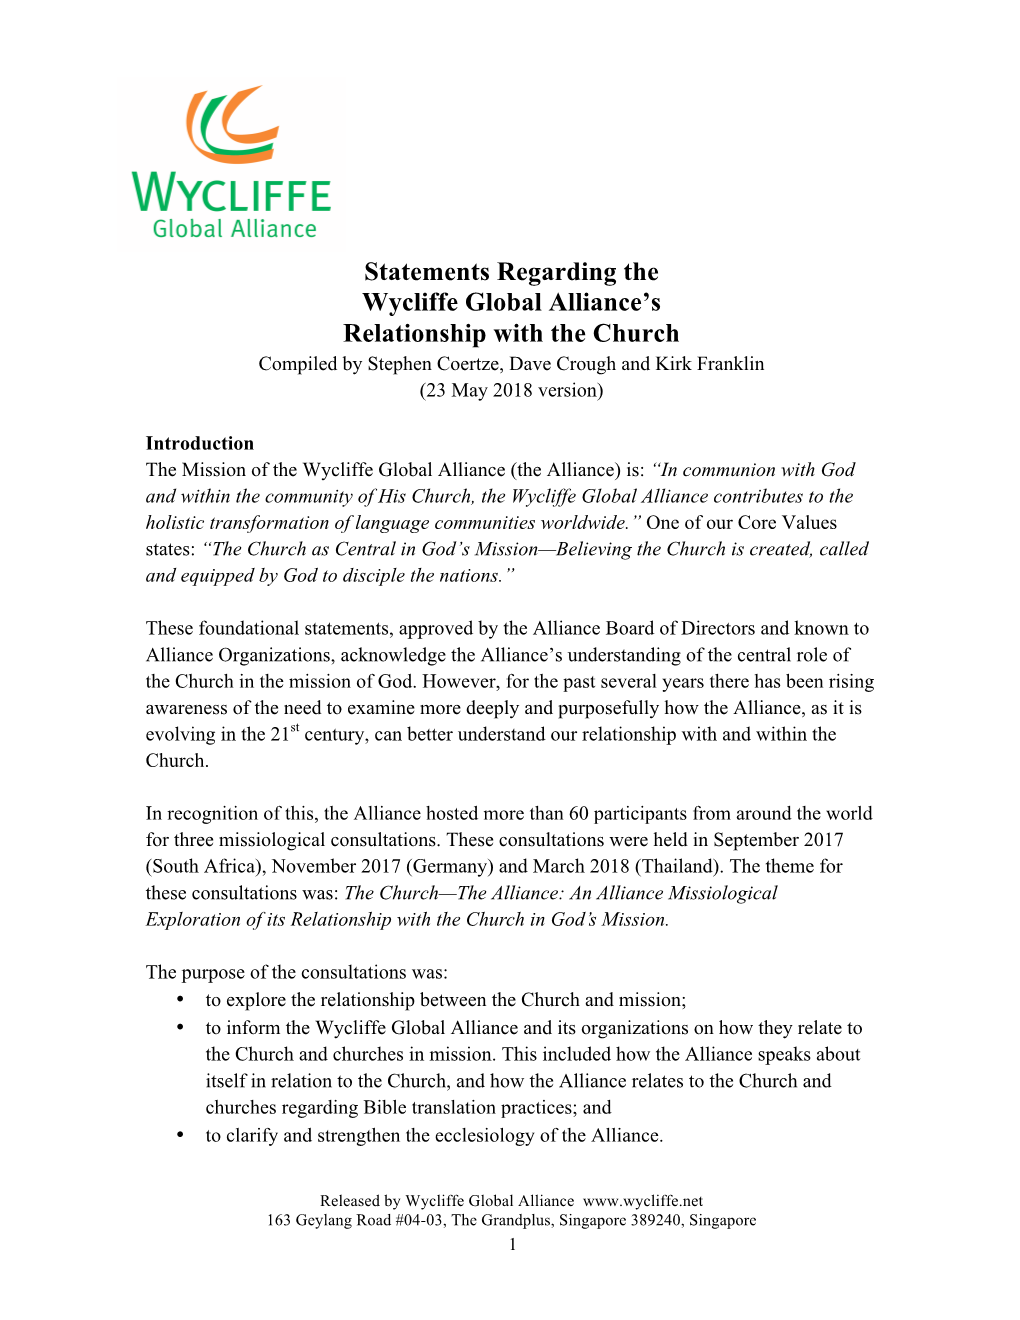 Statements Regarding the Wycliffe Global Alliance's Relationship With